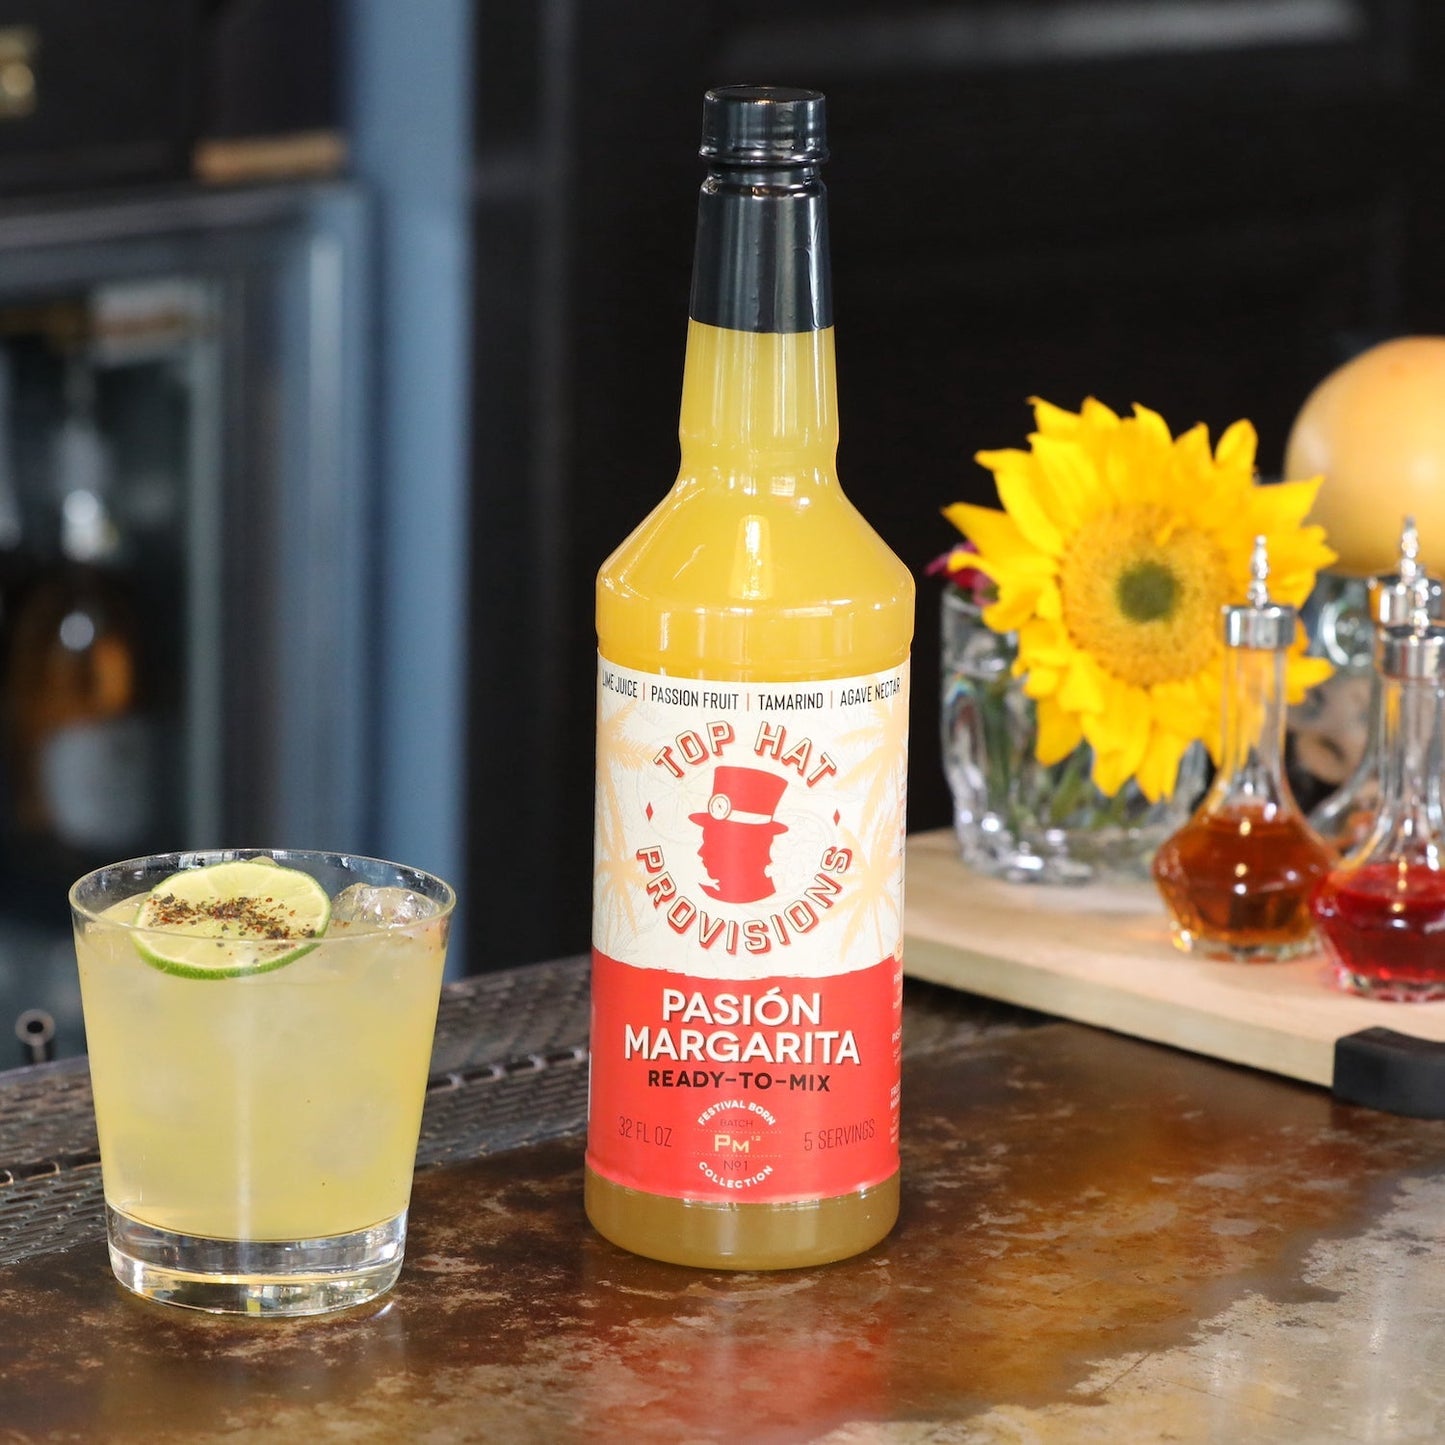 Top Hat Passion Fruit Margarita Mix (Made with real passion fruit & agave nectar) - Groove Rabbit